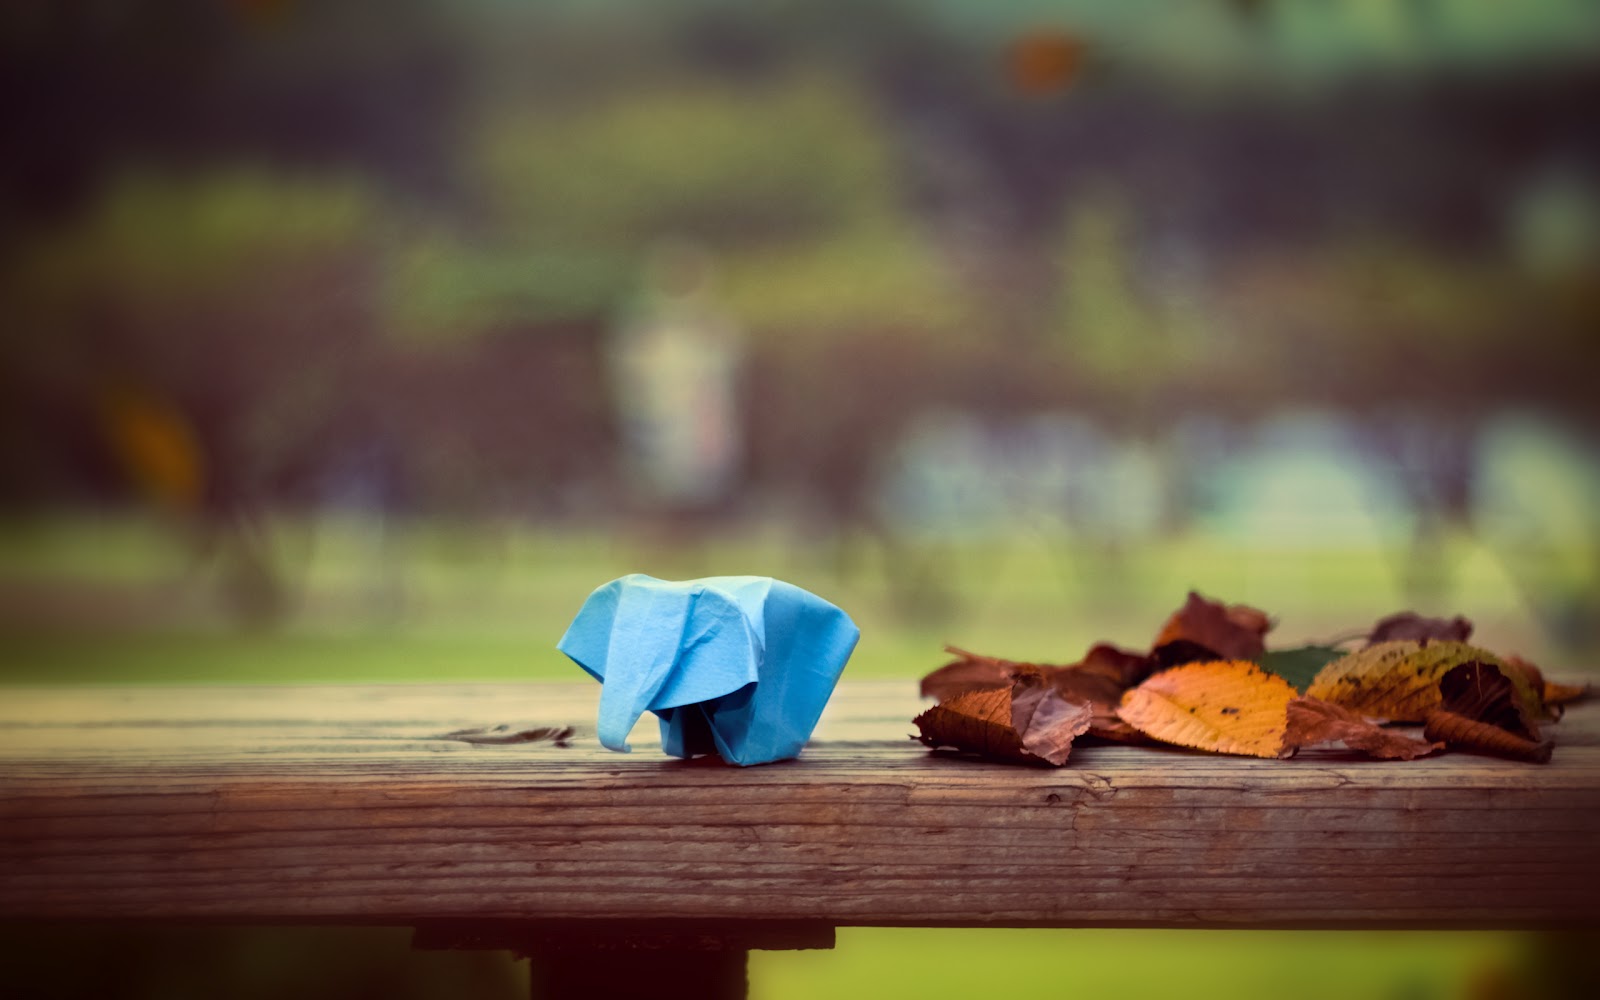 ... paper ellephant on a bench in a sad day, 2012 free download wallpapers